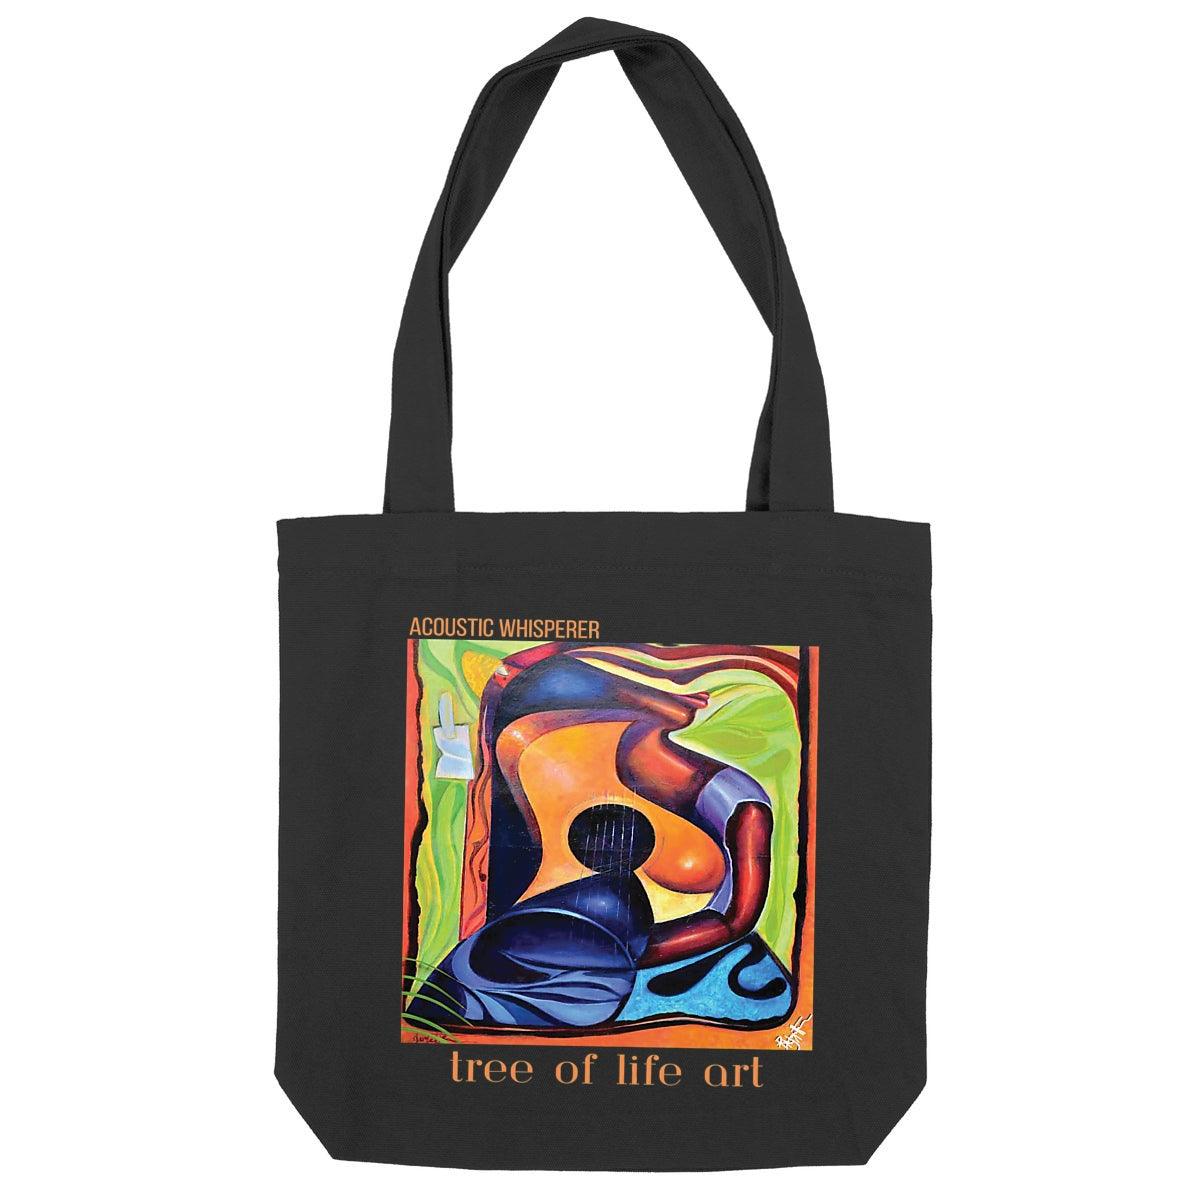 Acoustic Whisperer Premium Heavy Totebag, crafted from eco-friendly recycled materials, designed by Tree of Life Art, robust and sustainable.